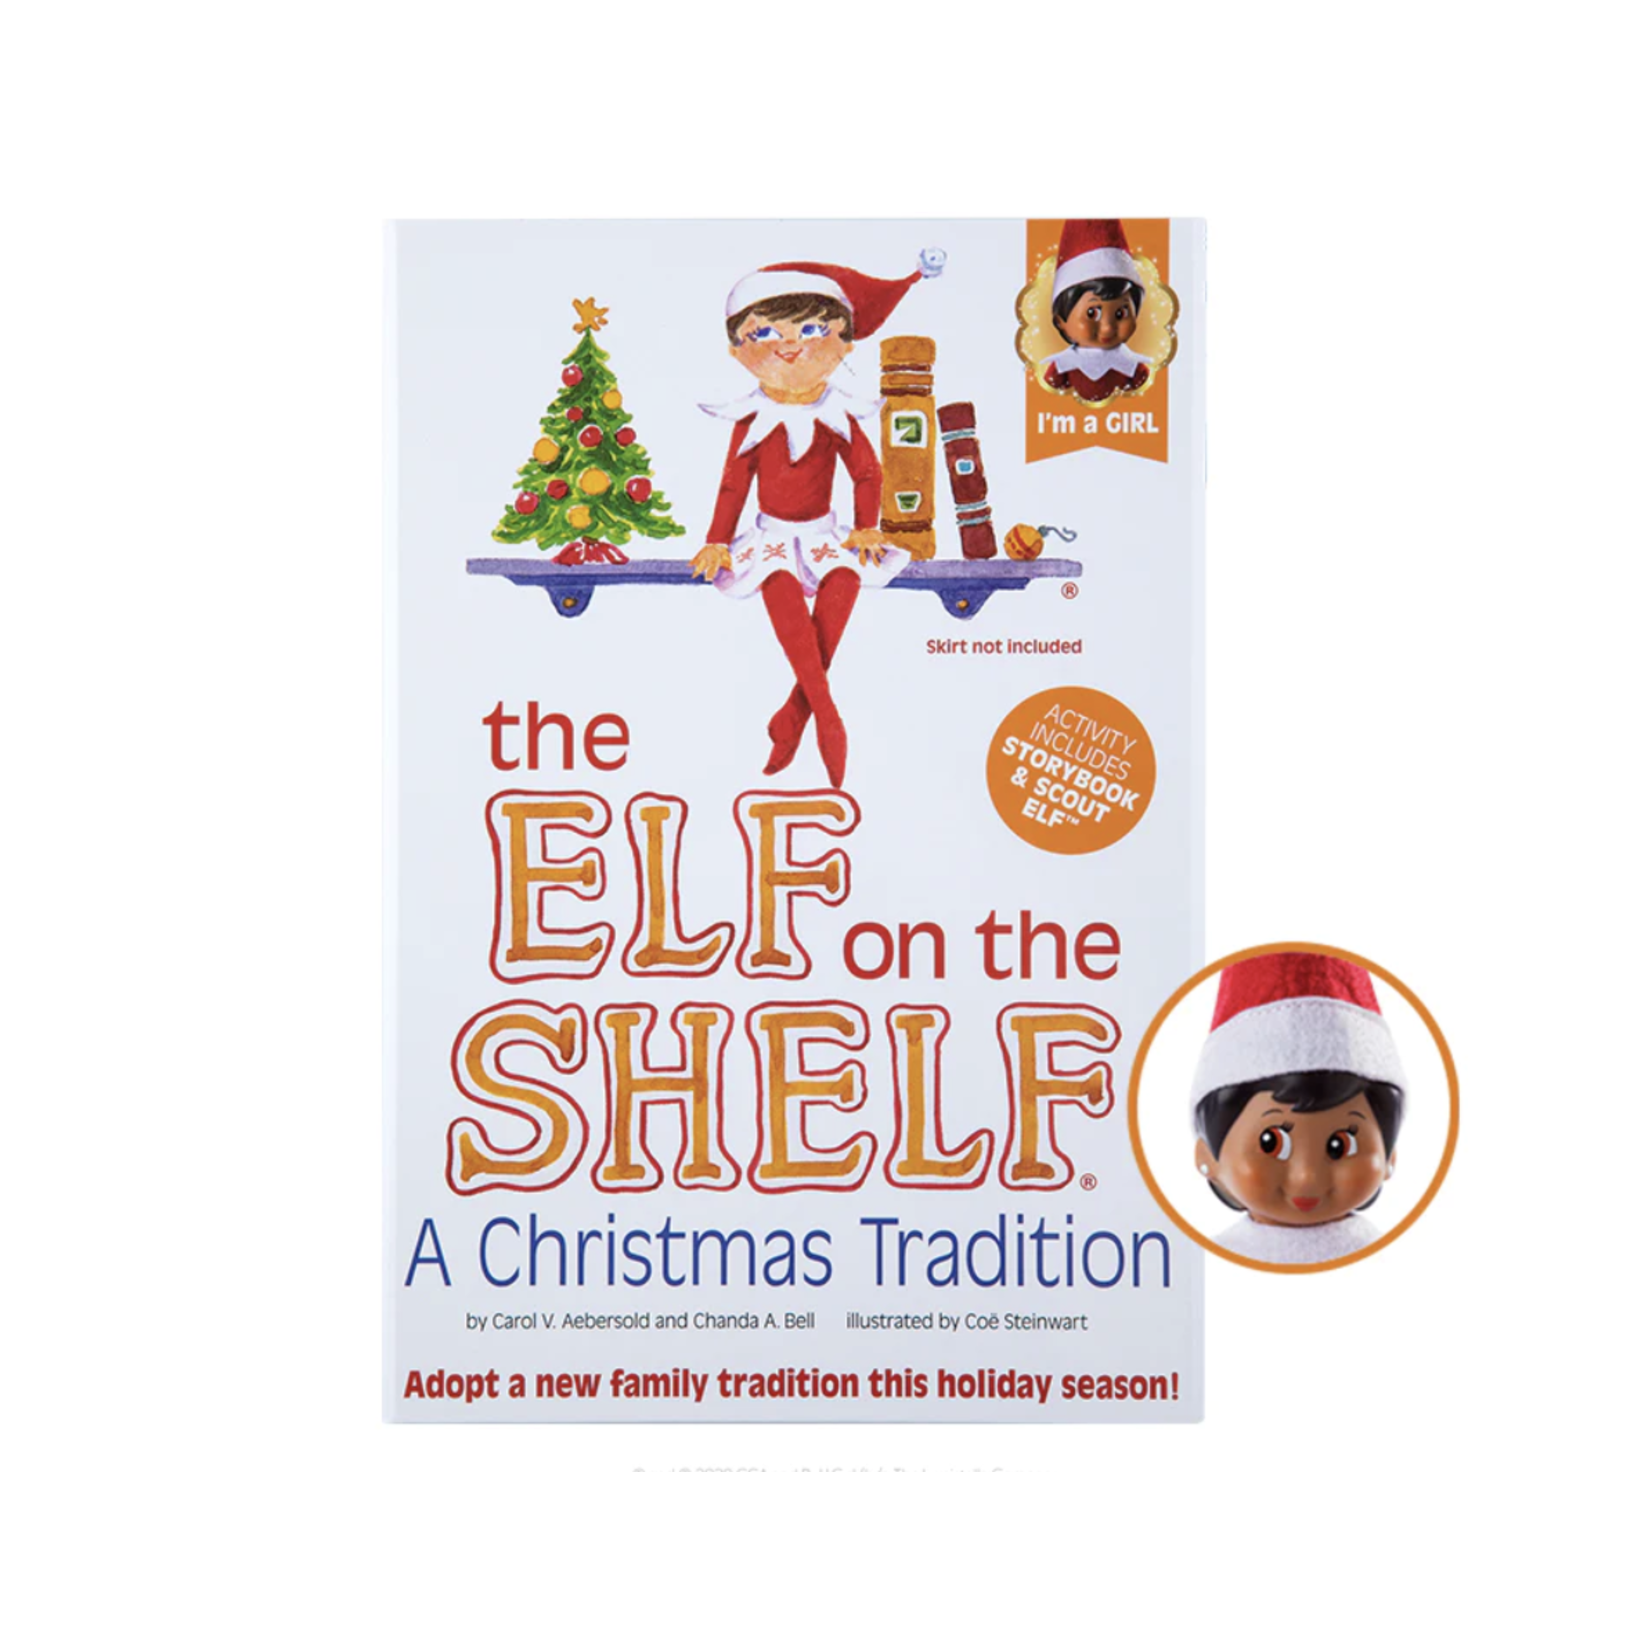 Elf On The Shelf Scout Elf and Christmas Tradition Box Set – Santa's Store:  The Elf on the Shelf®